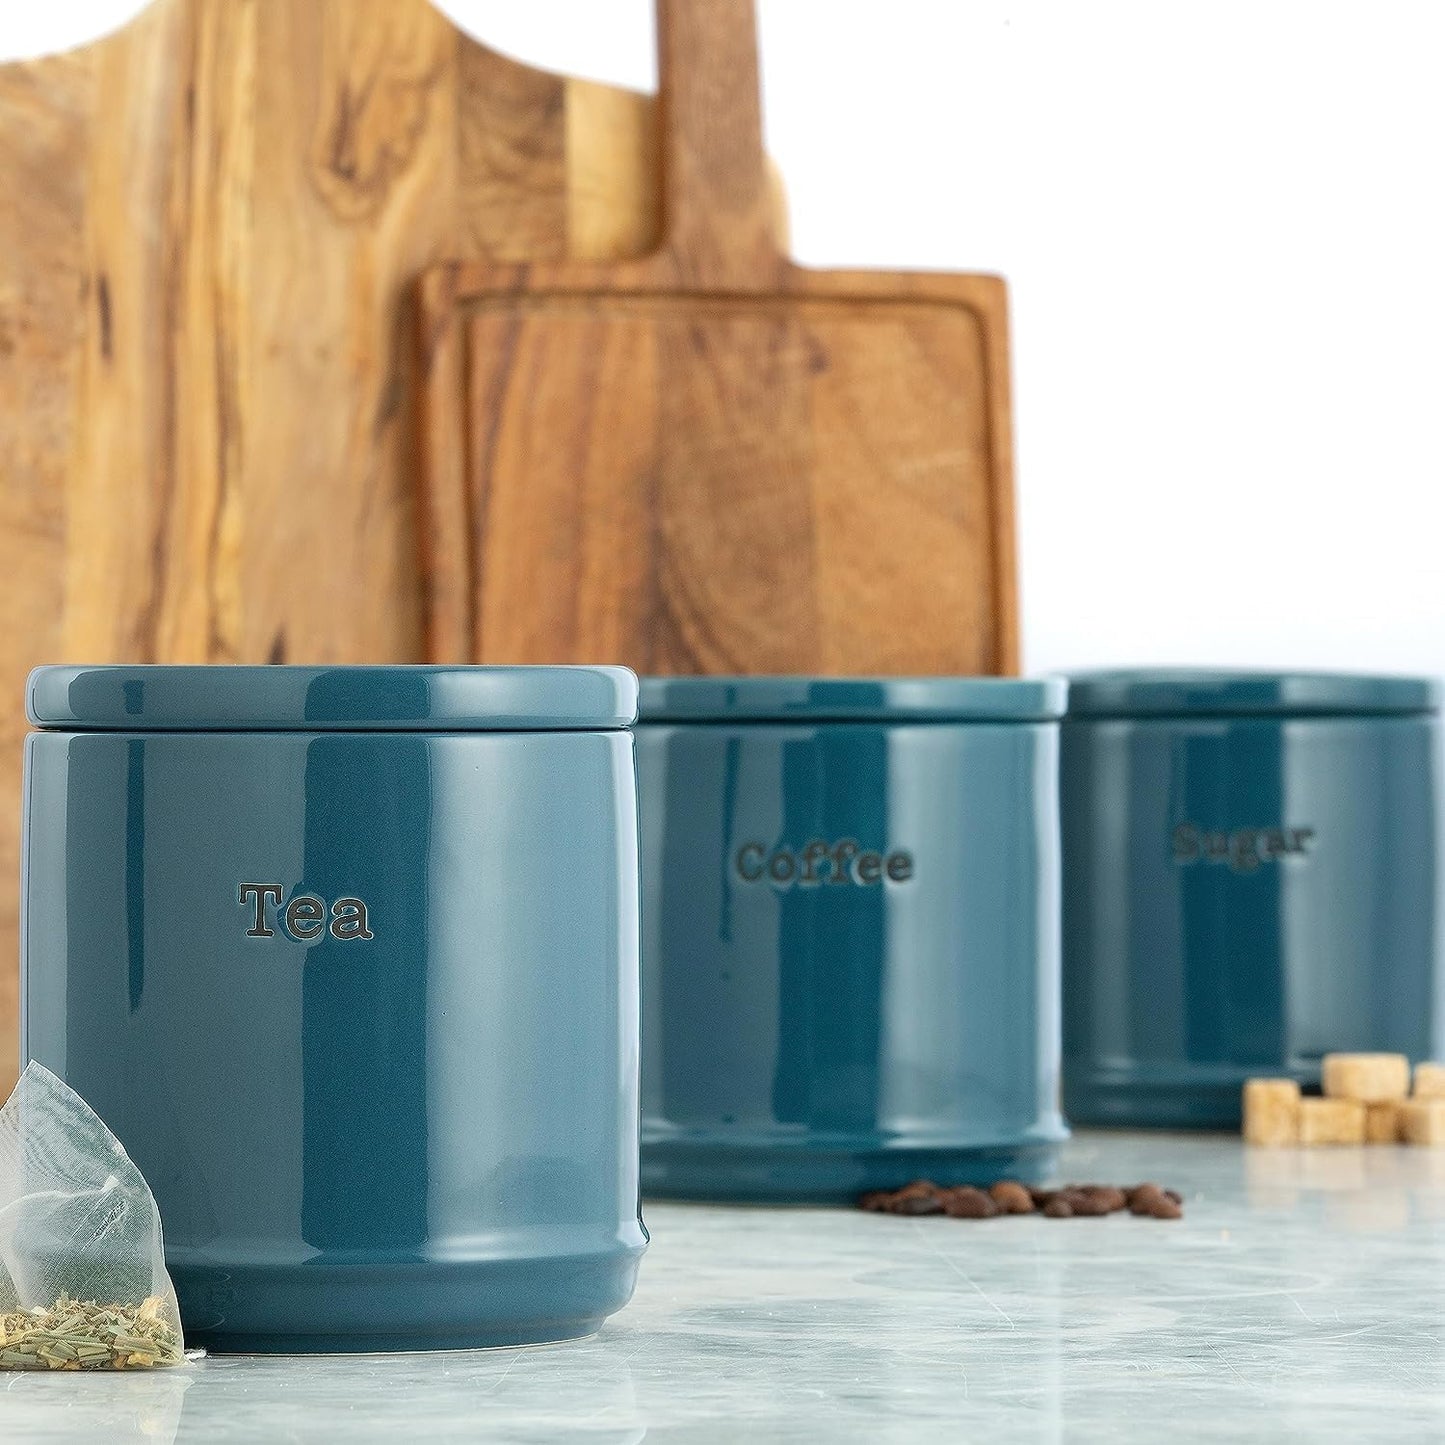 Accents Tea/Coffee/Sugar Canisters Set in TEAL